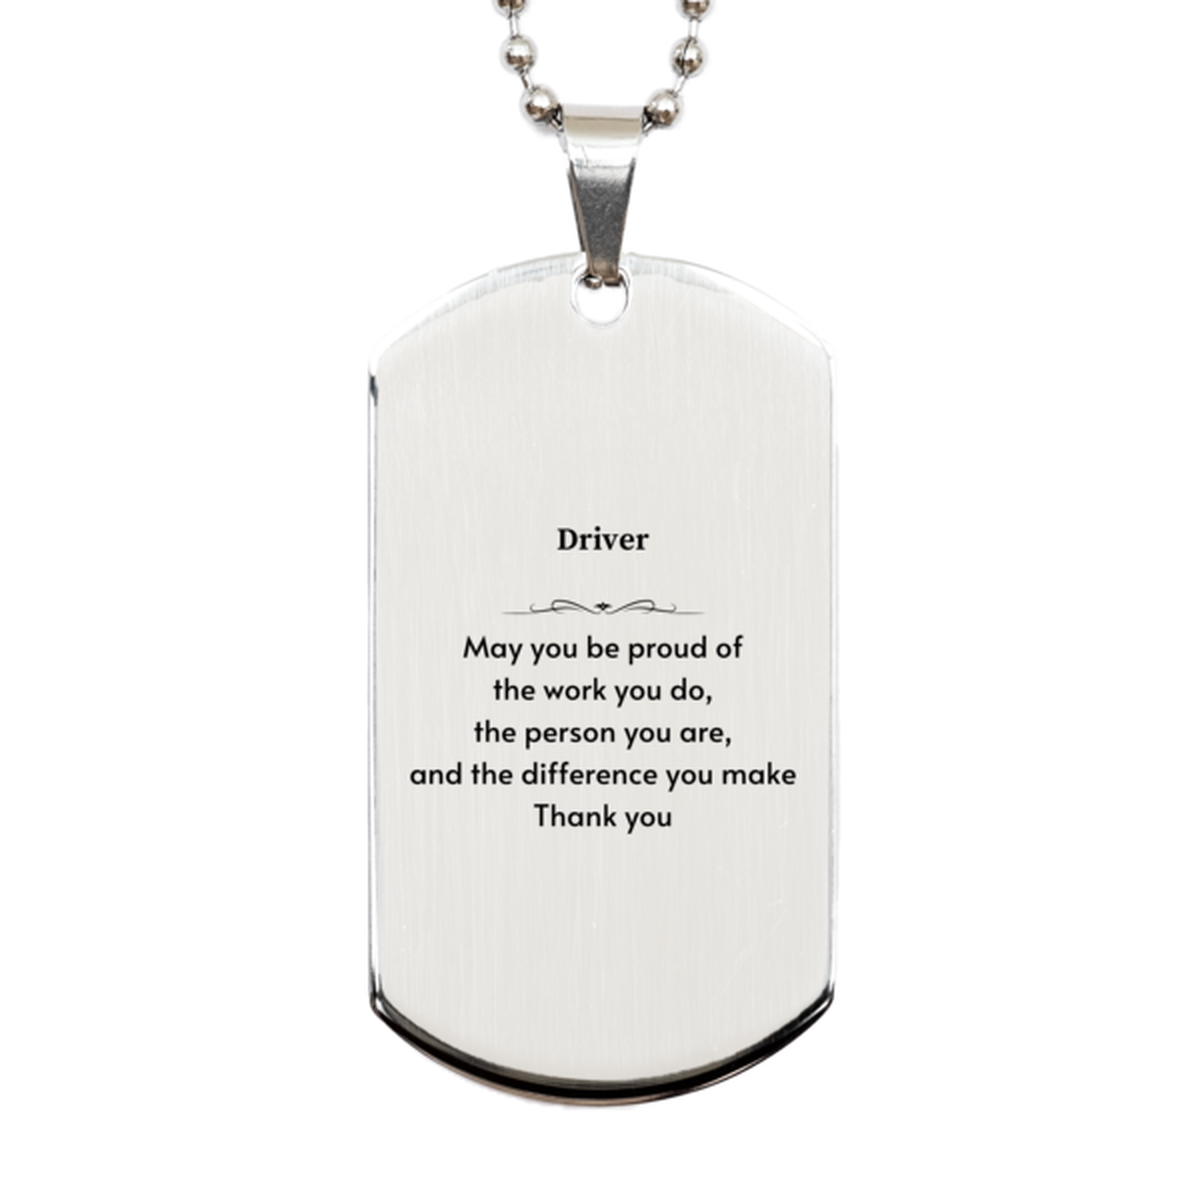 Heartwarming Silver Dog Tag Retirement Coworkers Gifts for Driver, Driver May You be proud of the work you do, the person you are Gifts for Boss Men Women Friends